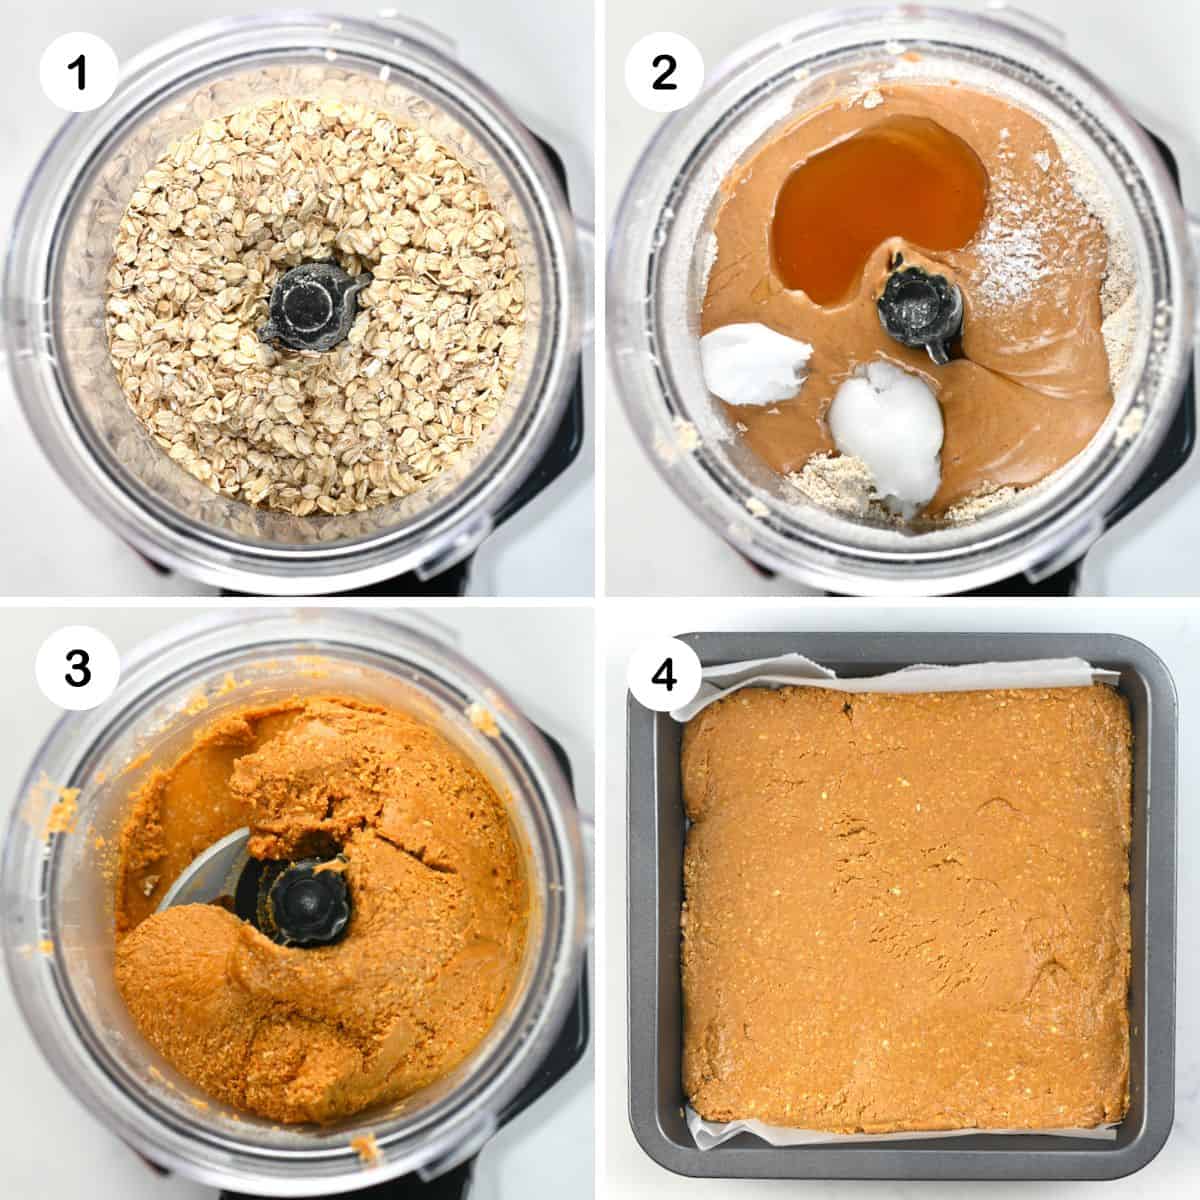 Steps for preparing the peanut butter layer